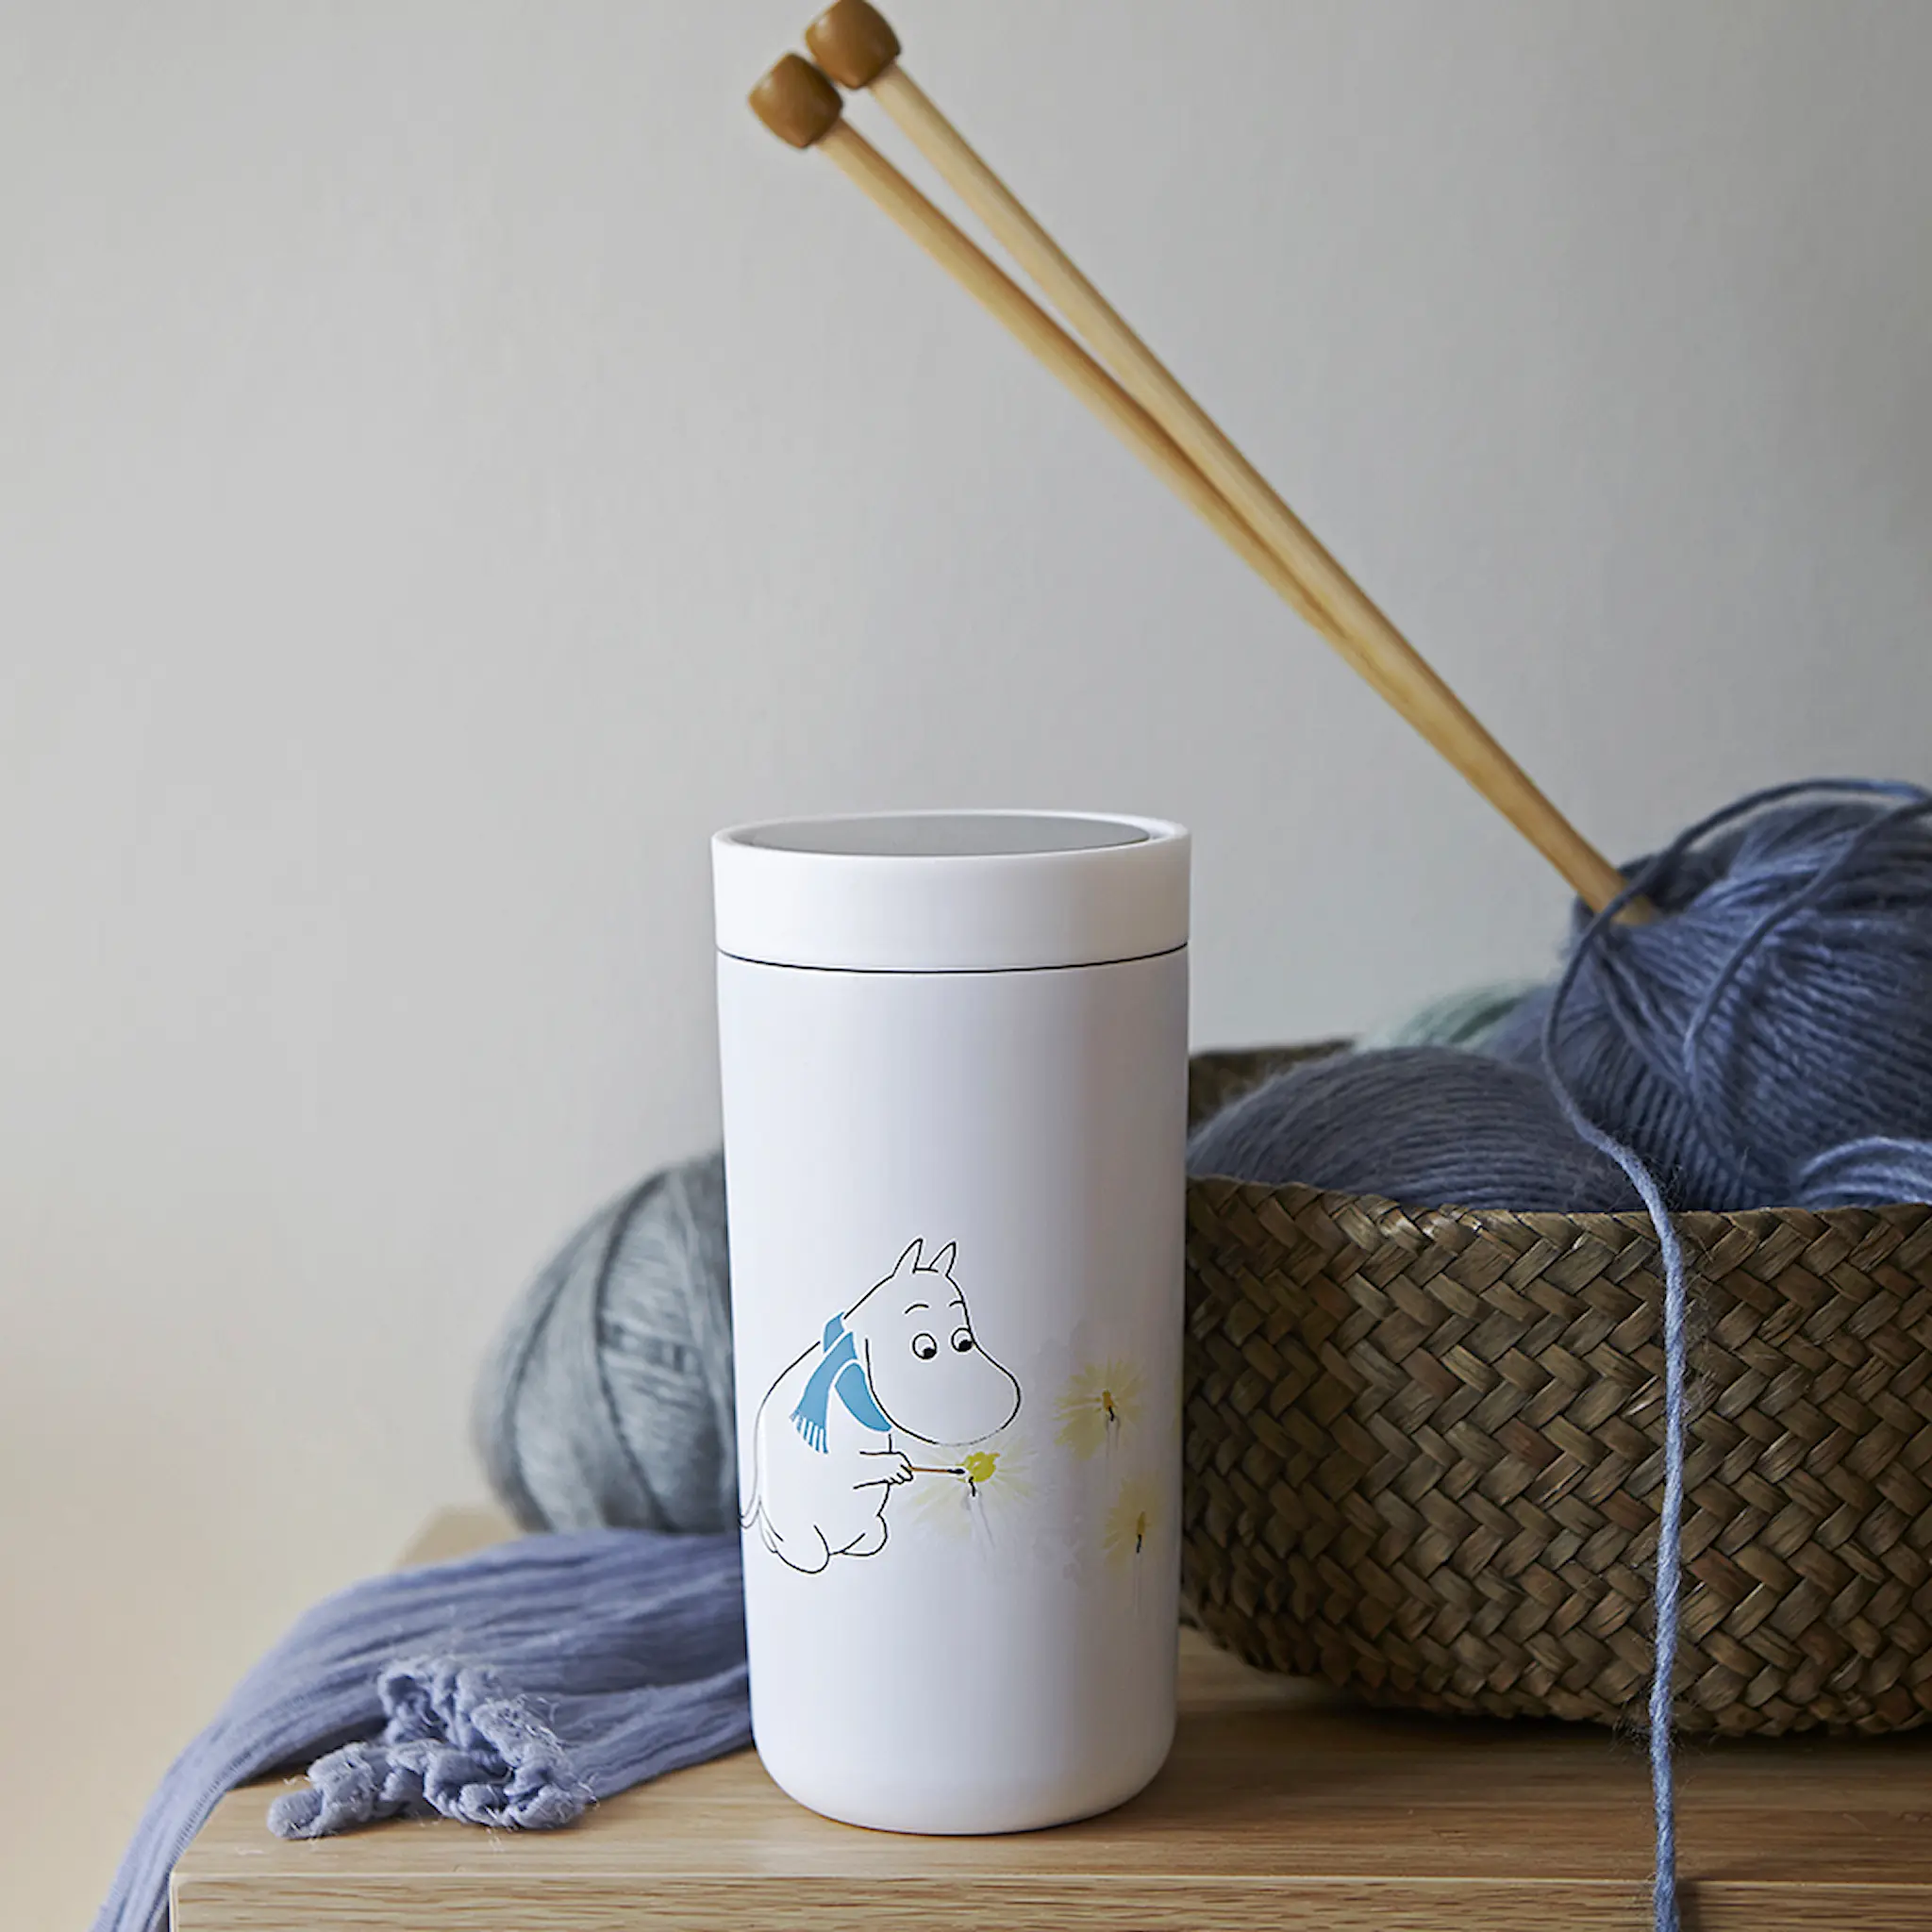 Stelton Mumin To Go Click Mugg 40 cl Frost